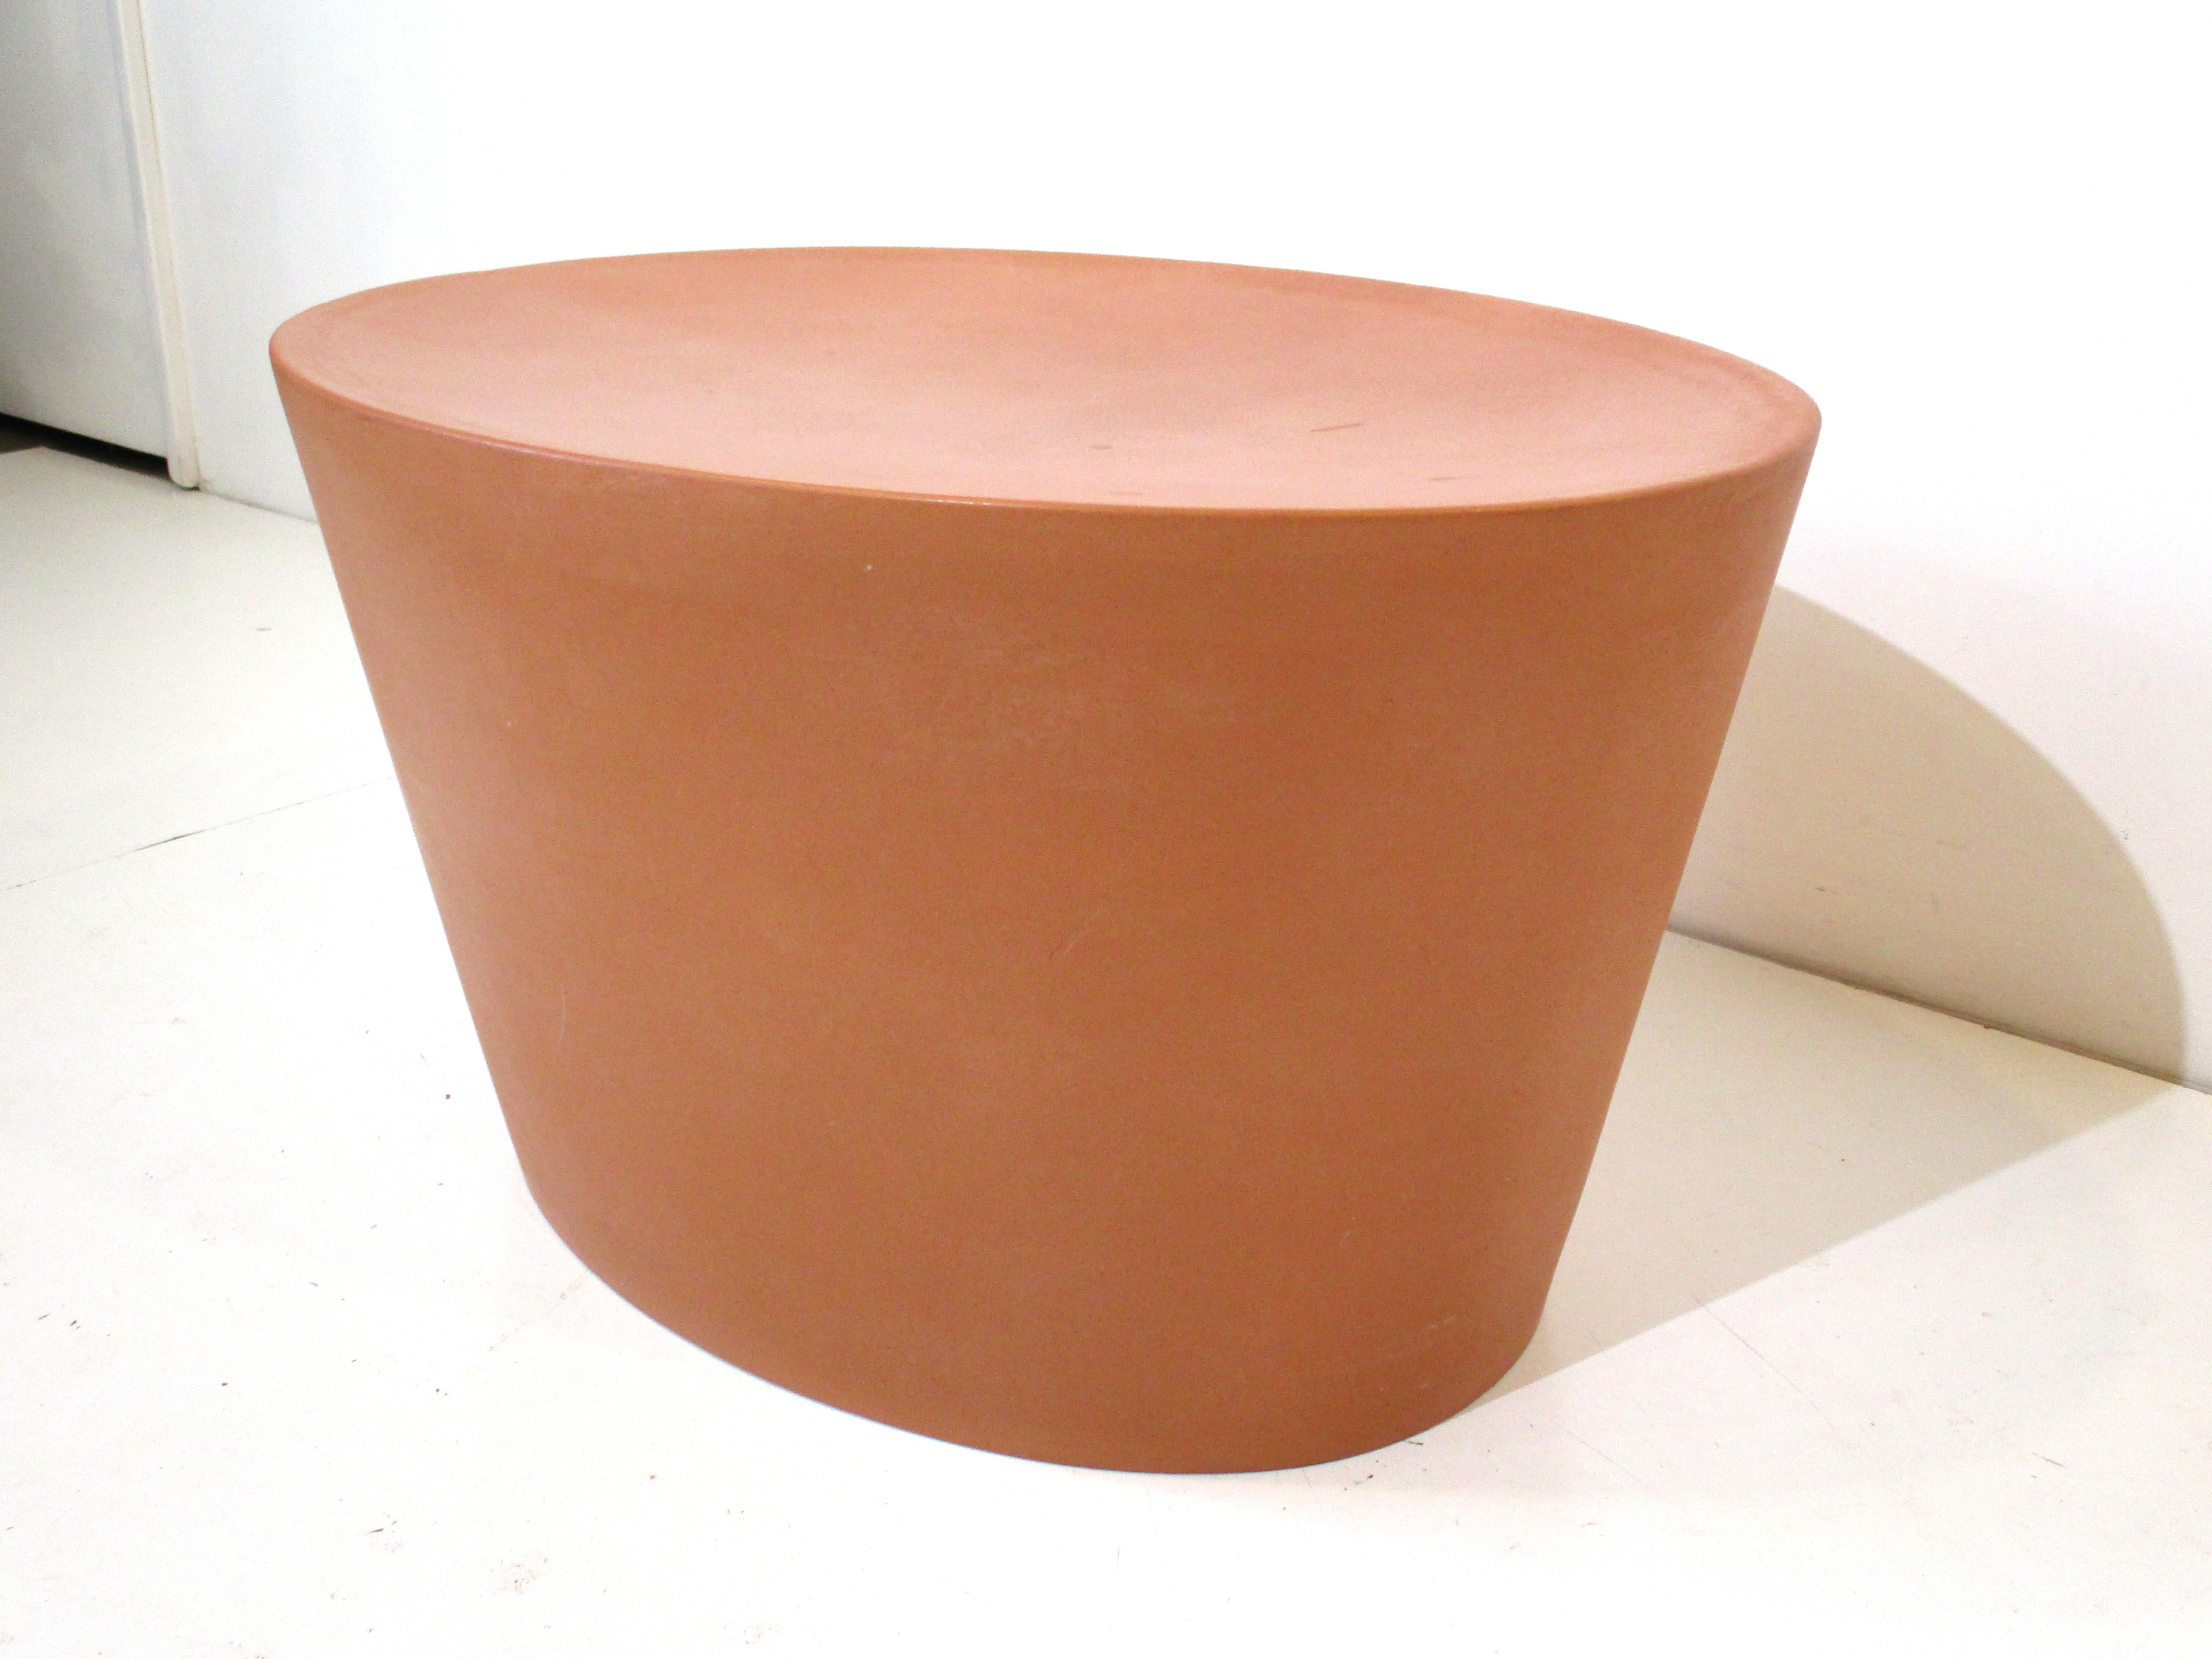 A first generation solid concrete stool or coffee table designed by Maya Lin which used a tinting process for coloring. Only the first gen where made of concrete and after that they were made of a ABS type colored plastic. Produced by the artist